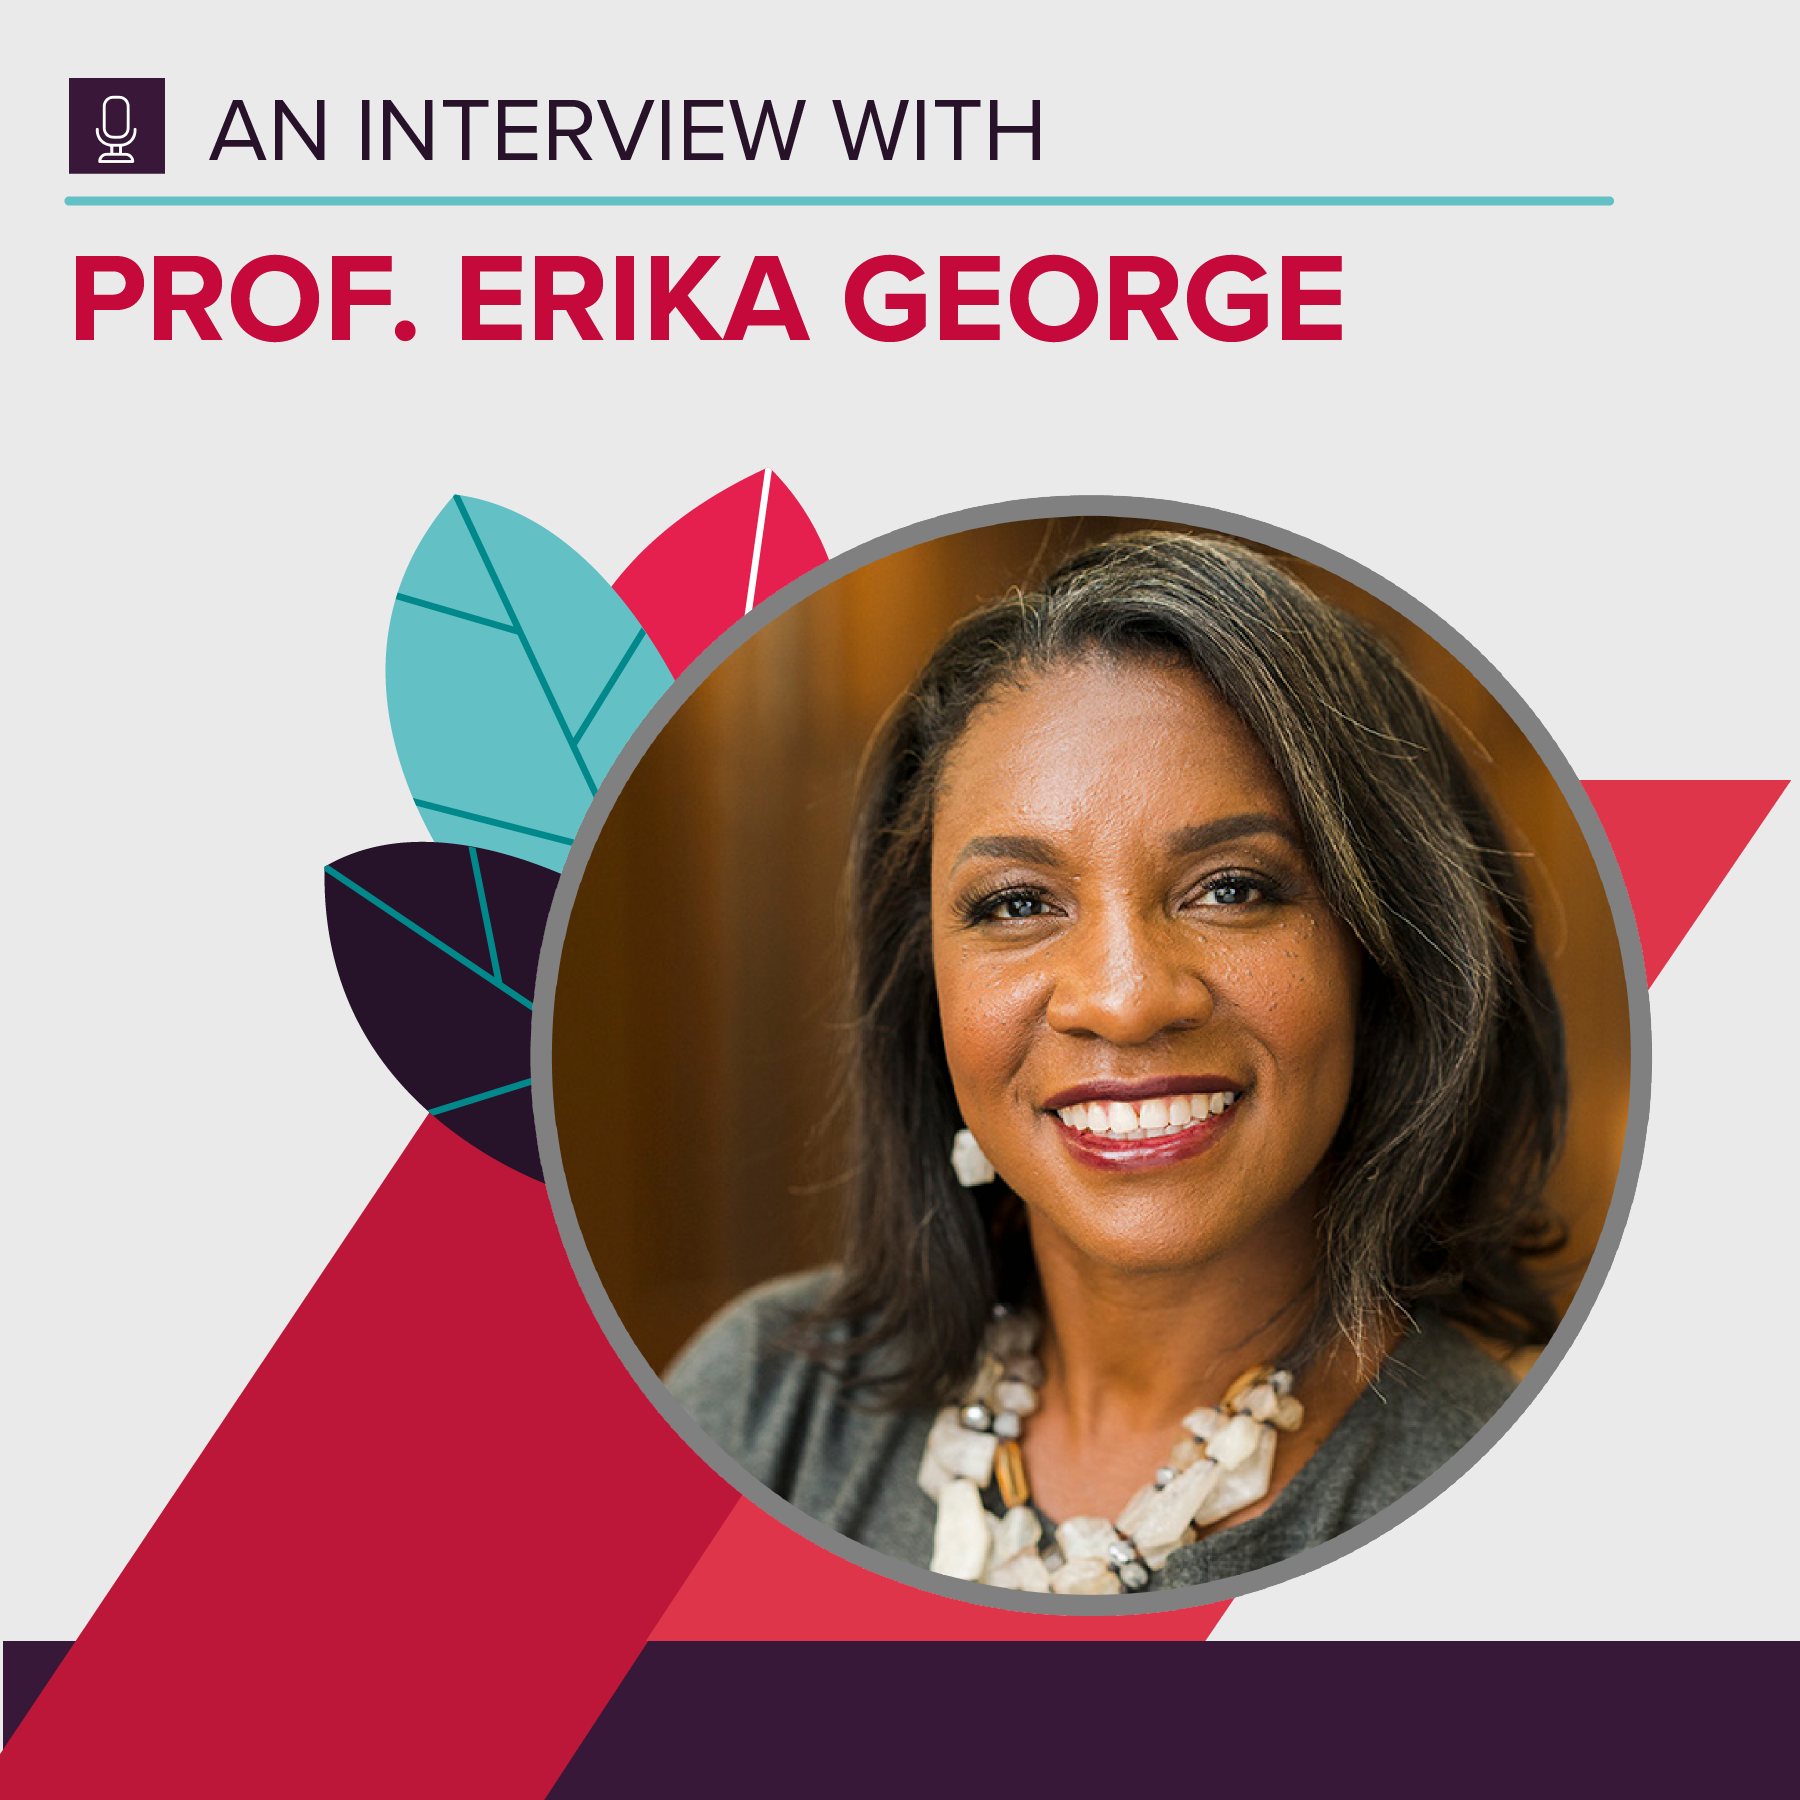 An interview with Professor Erika George